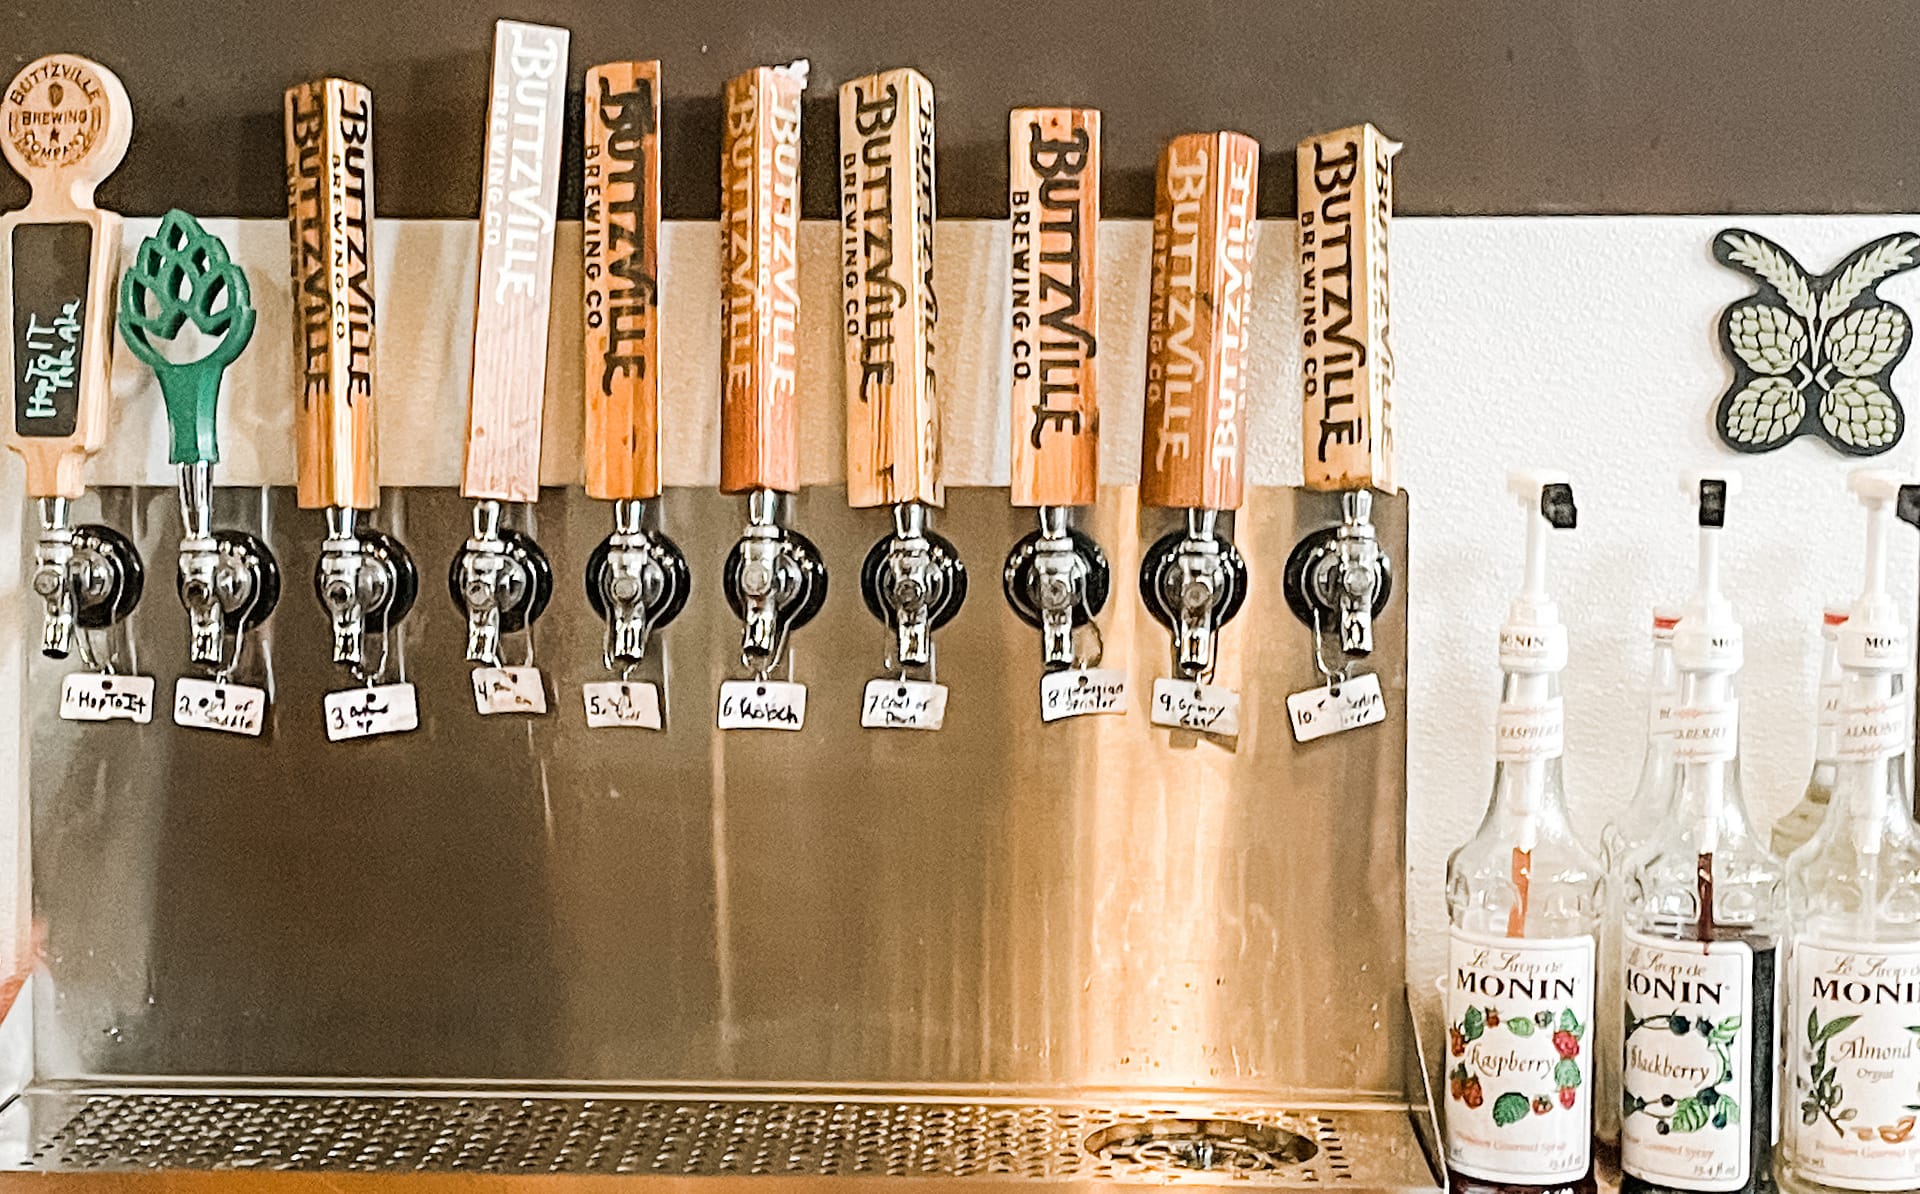 Tap handles at Buttzville Brewing Company